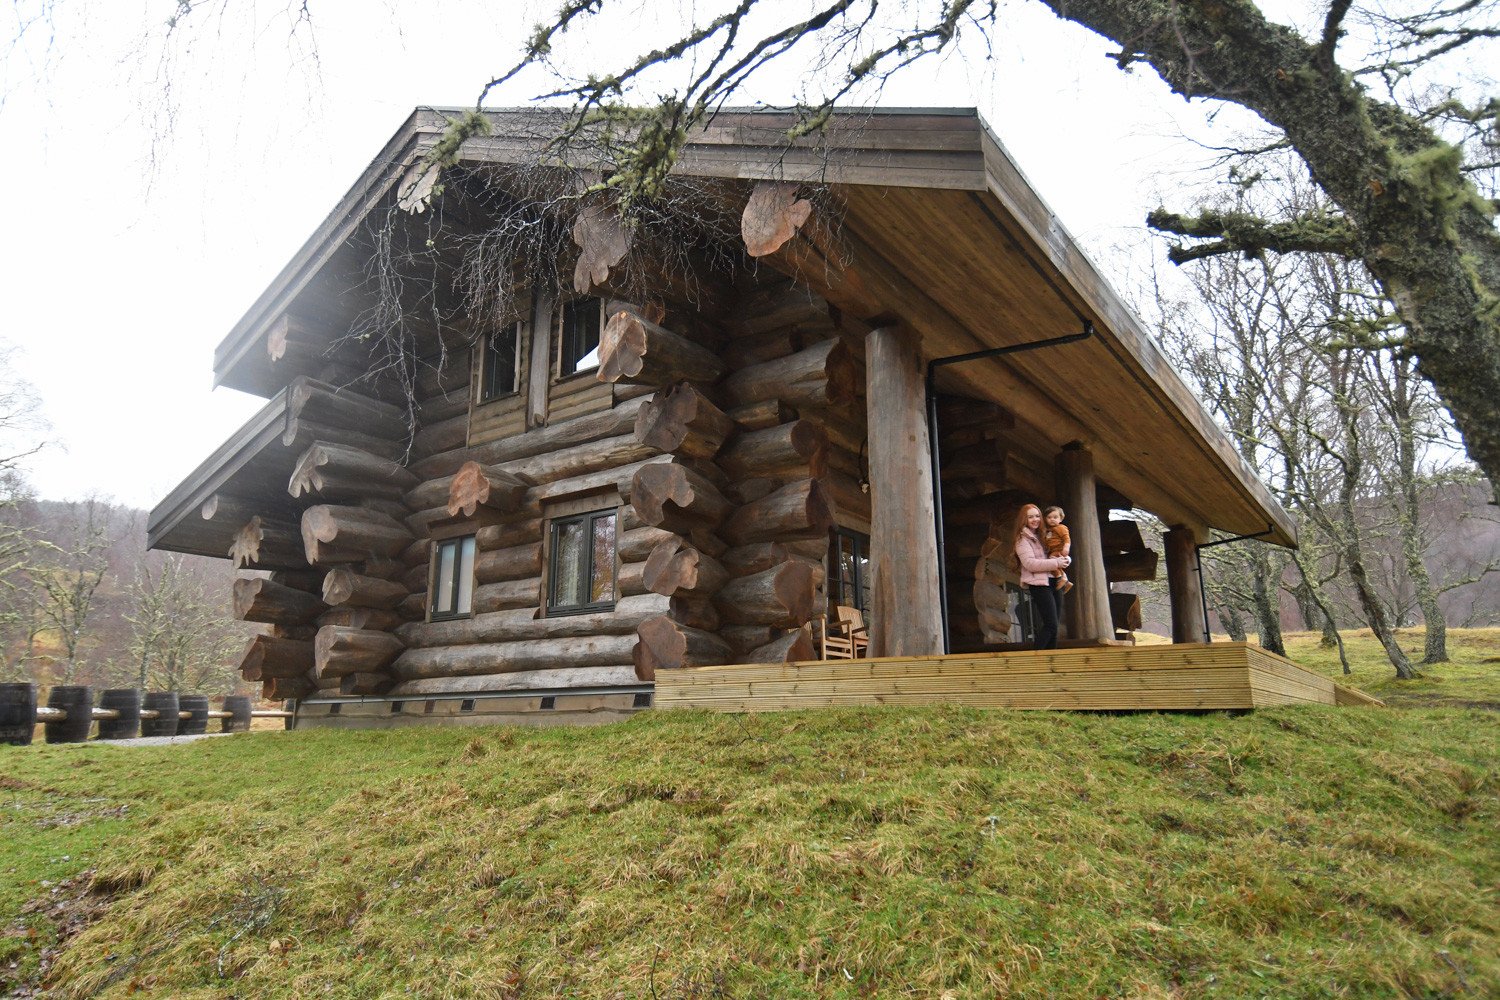 The Certhia log cabin at Eagle Brae, in the Scottish highlands